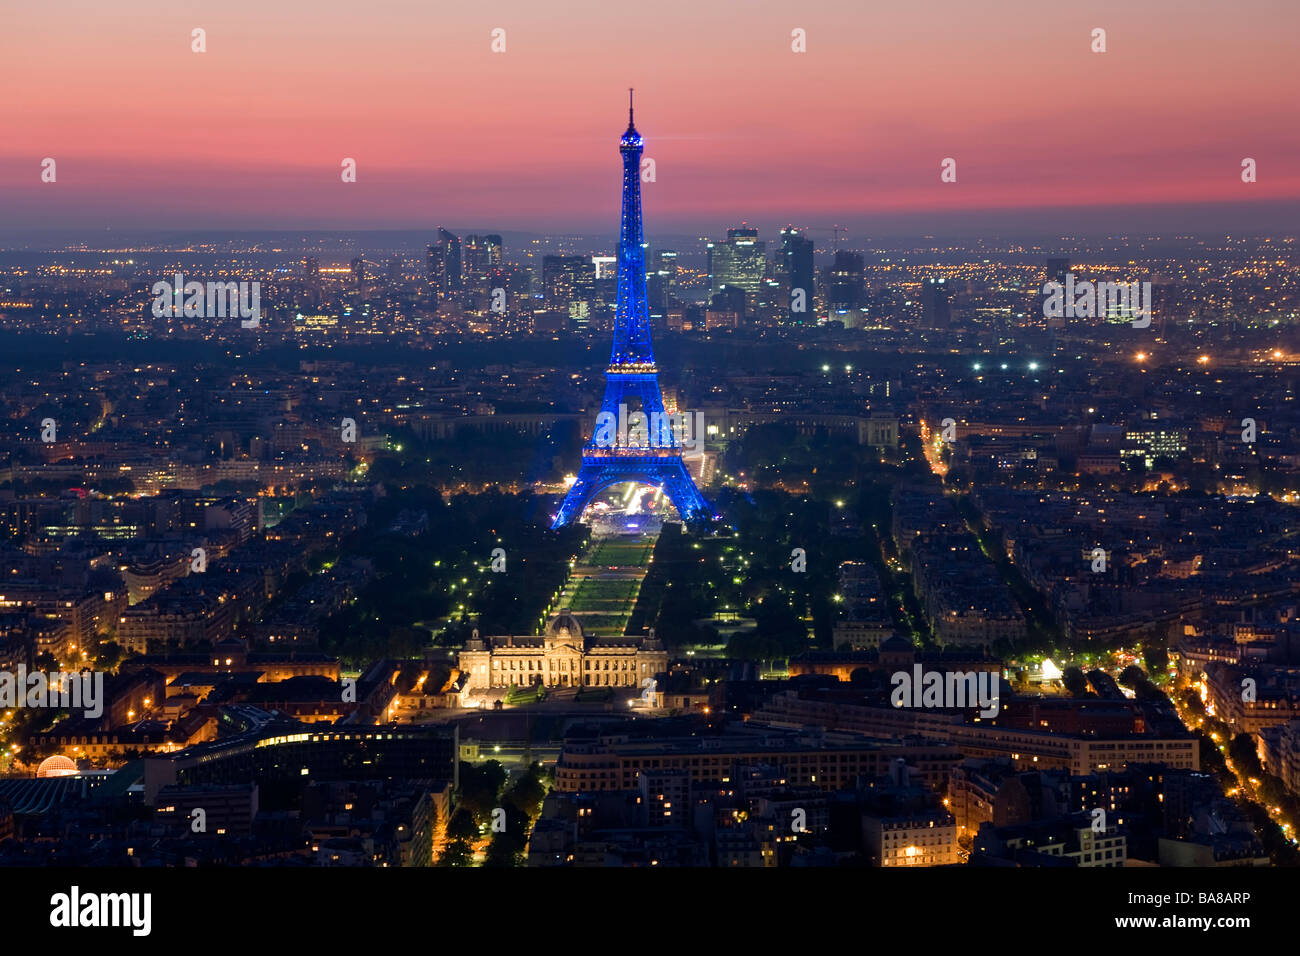 View over Eiffel Tower Paris France Stock Photo